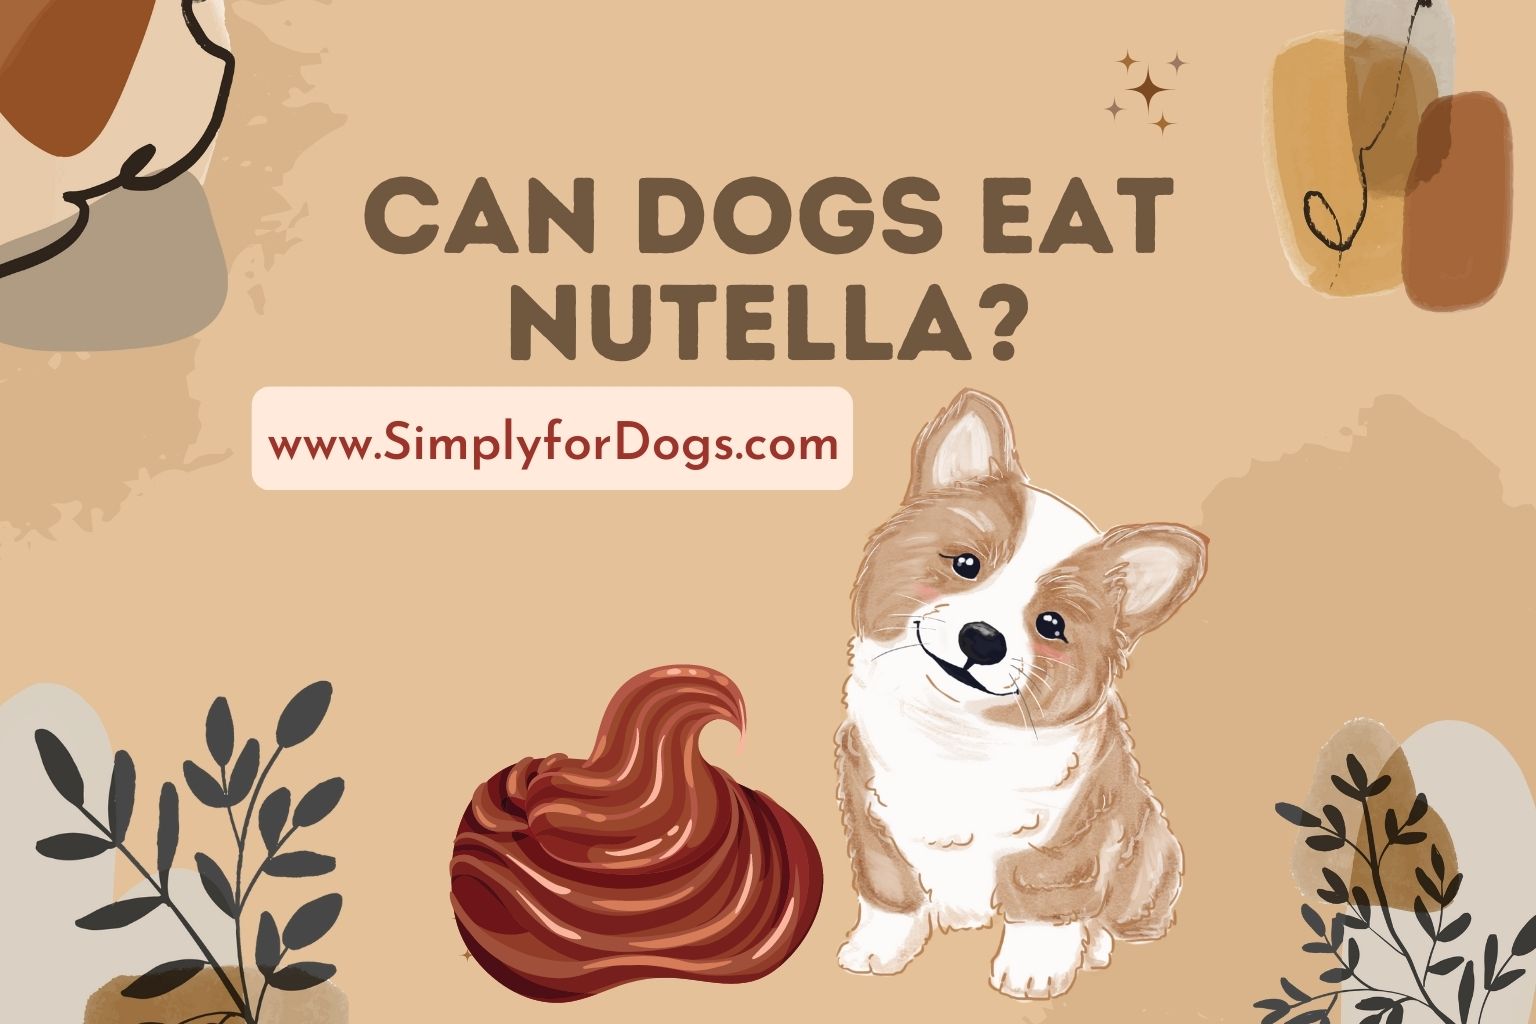 Can Dogs Eat Nutella